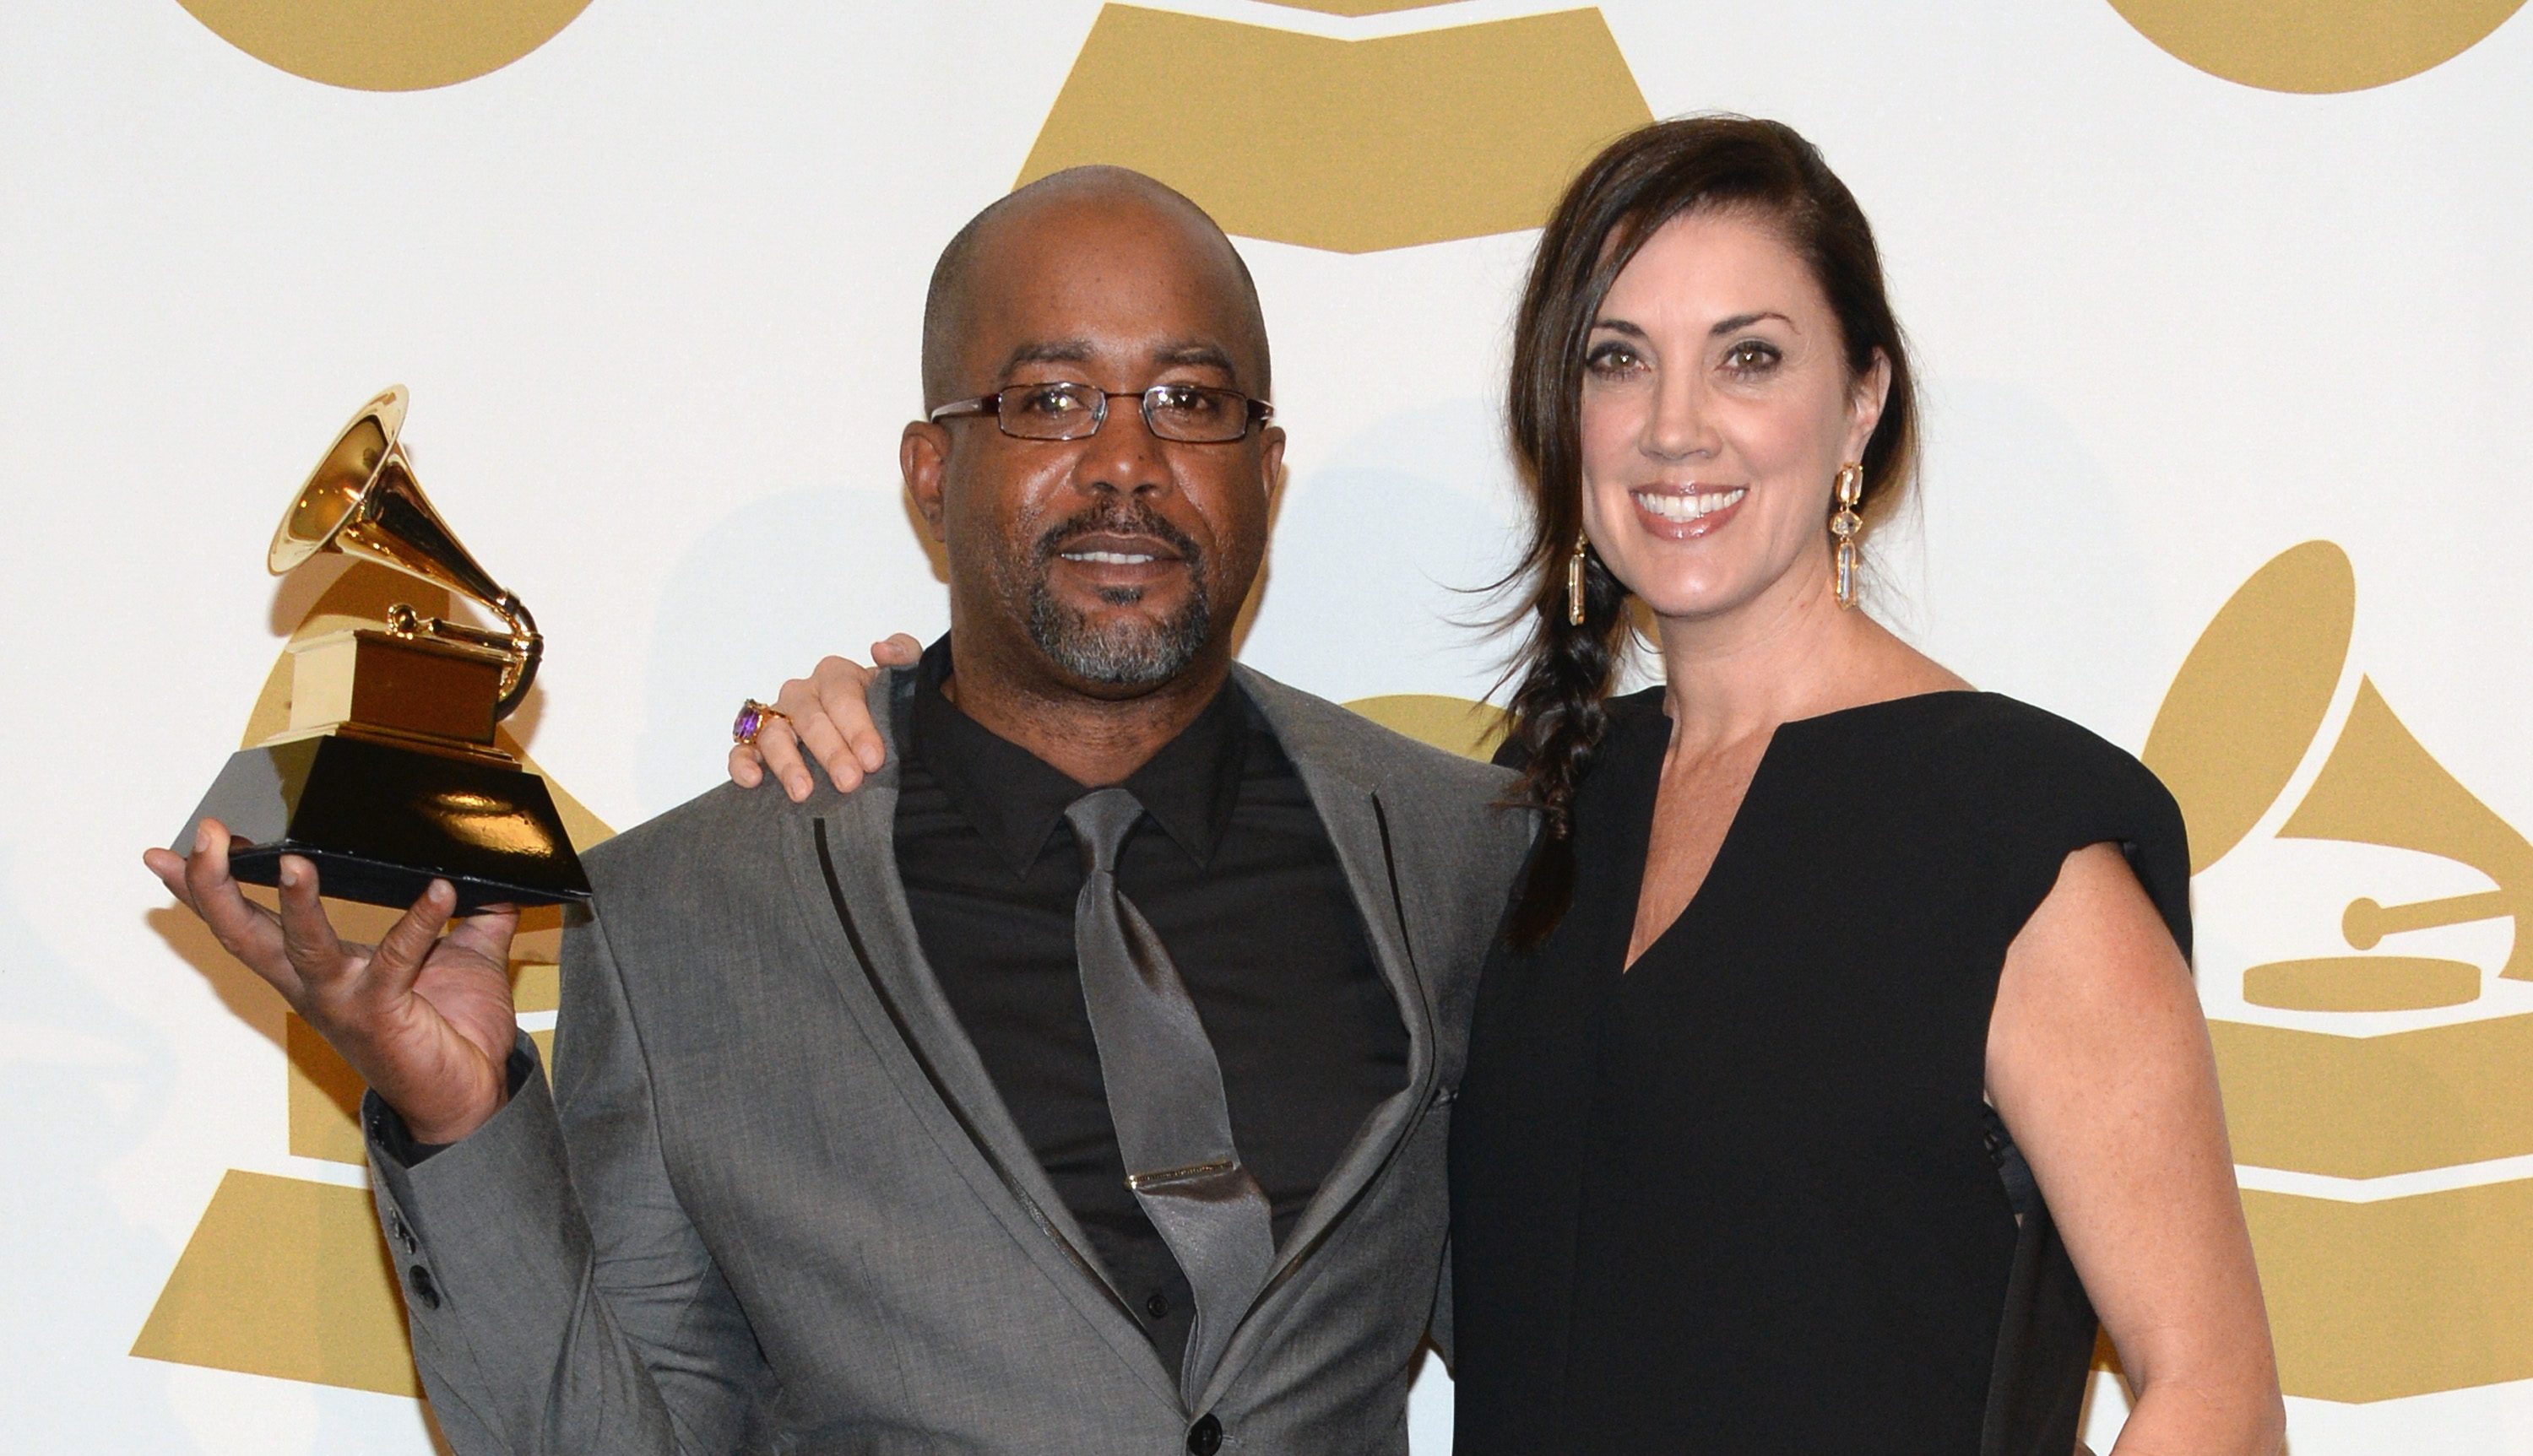 LOS ANGELES, CA - JANUARY 26: Recording artist Darius Rucker (L) and Beth Leonard pose in the press room during the 56th GRAMMY Awards at Staples Center on January 26, 2014 in Los Angeles, California.